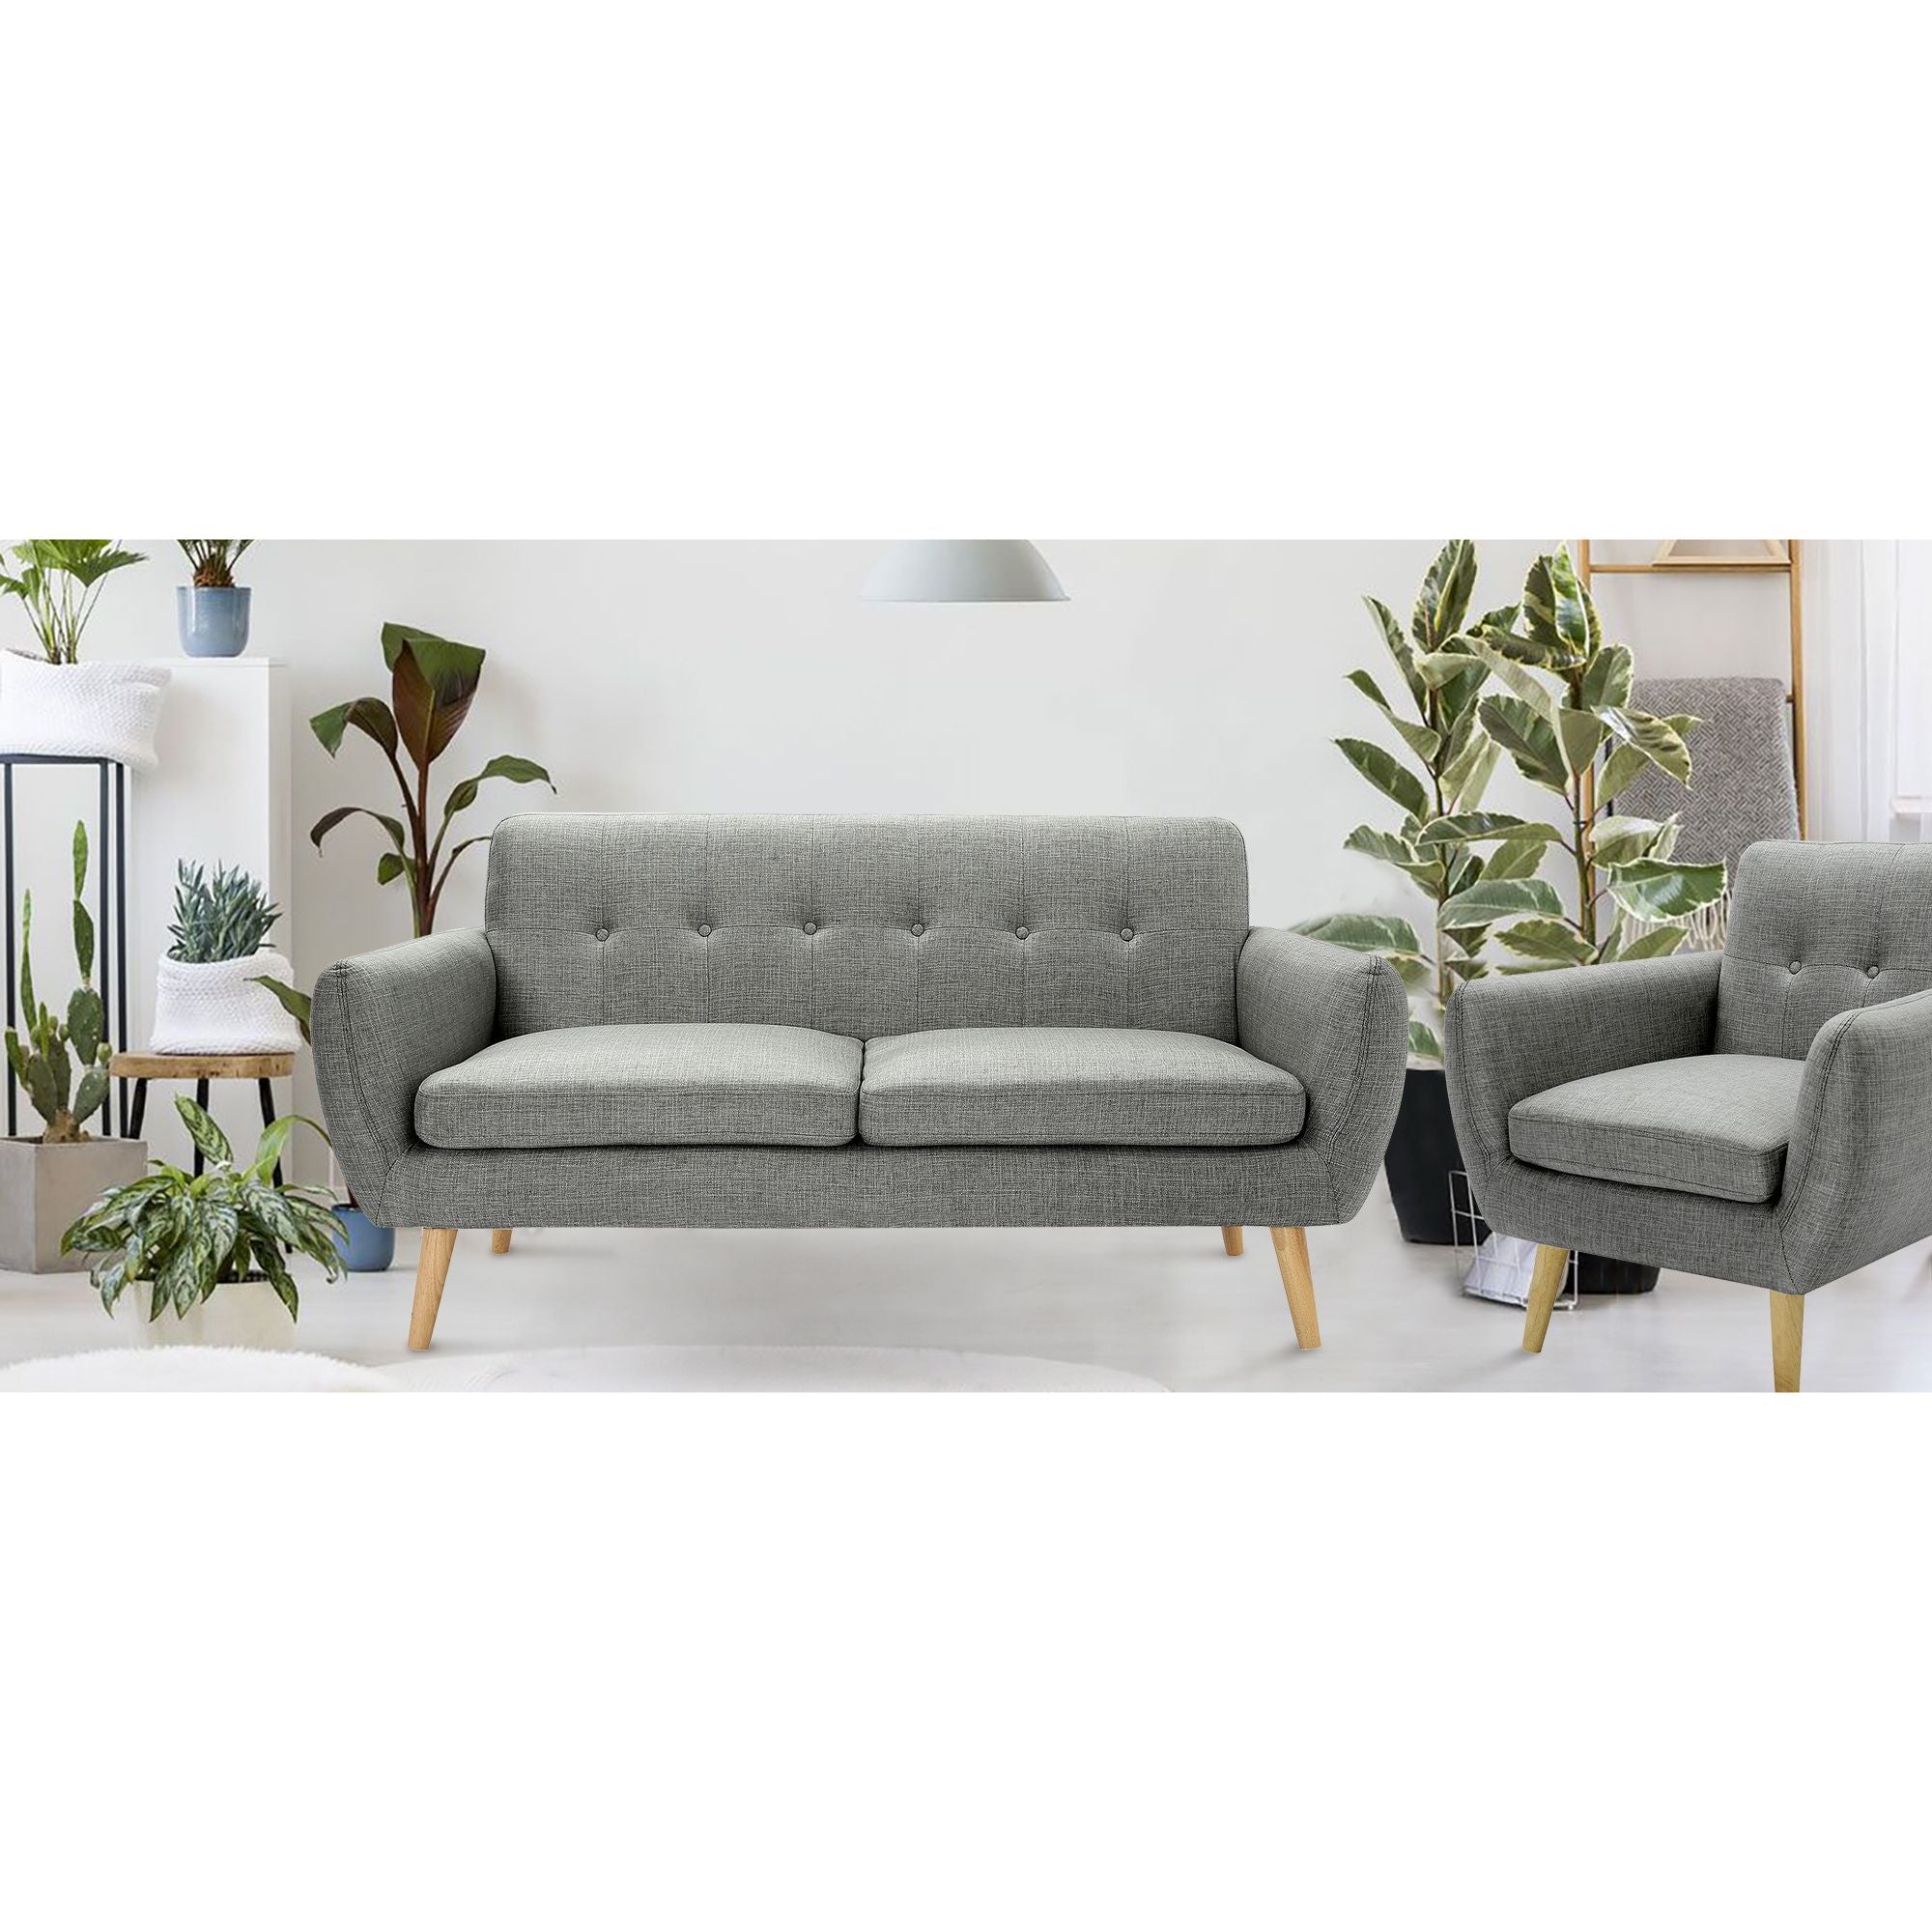 Dane 3 + 1 Seater Fabric Upholstered Sofa Armchair Lounge Couch - Mid Grey